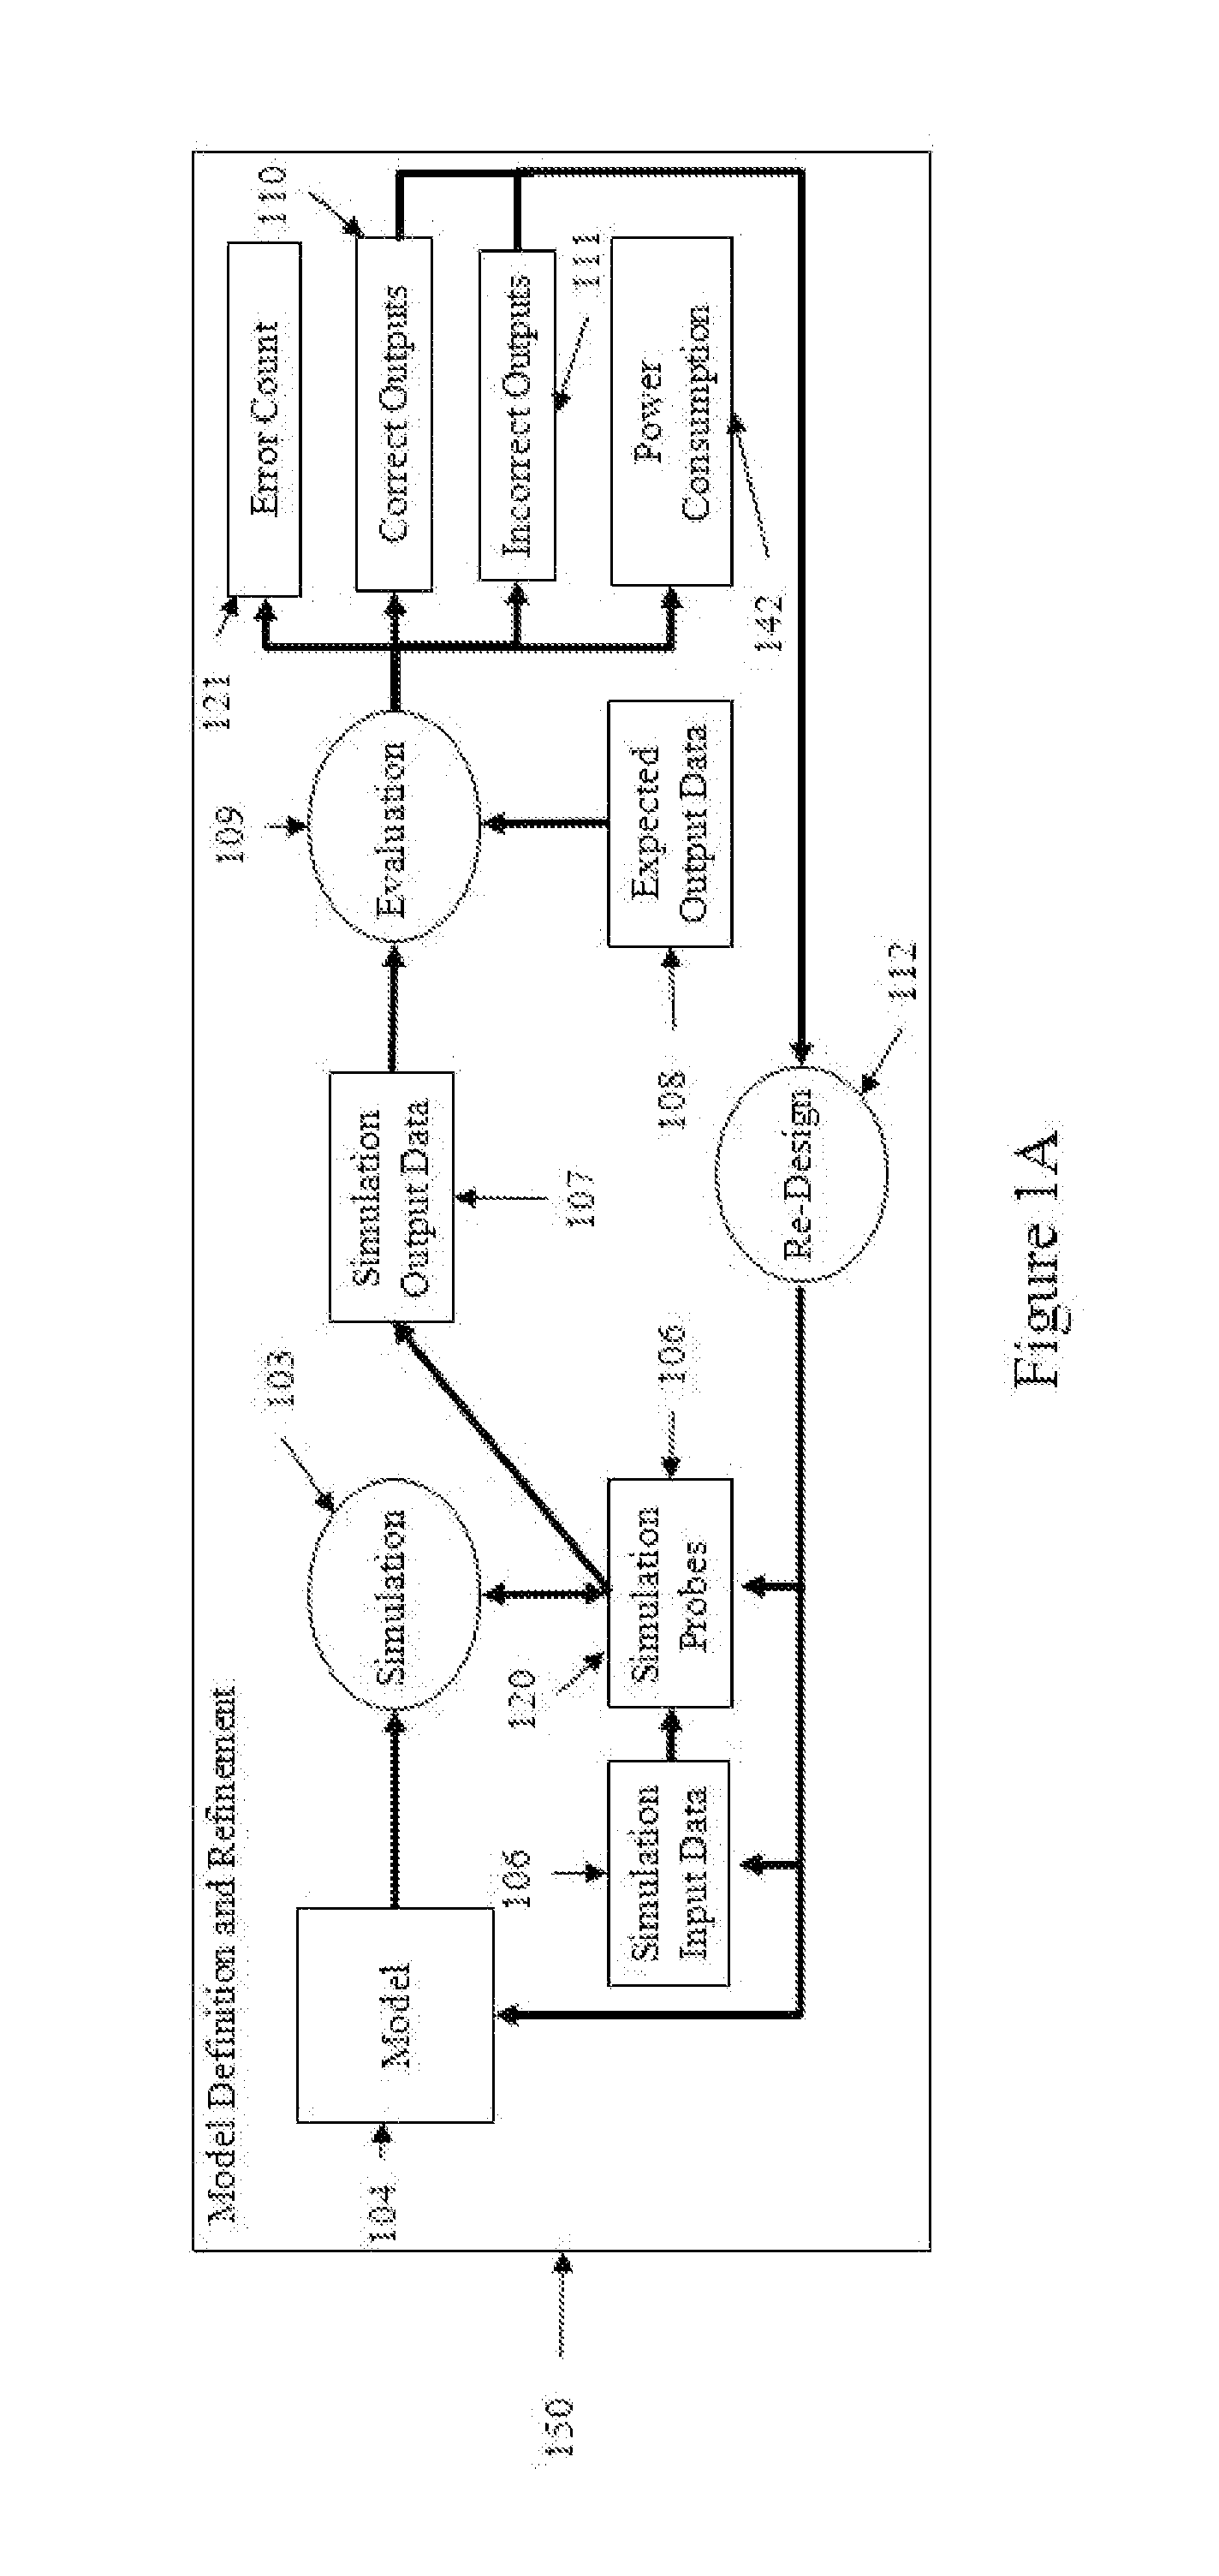 Systems and methods for circuit design, synthesis, simulation, and modeling